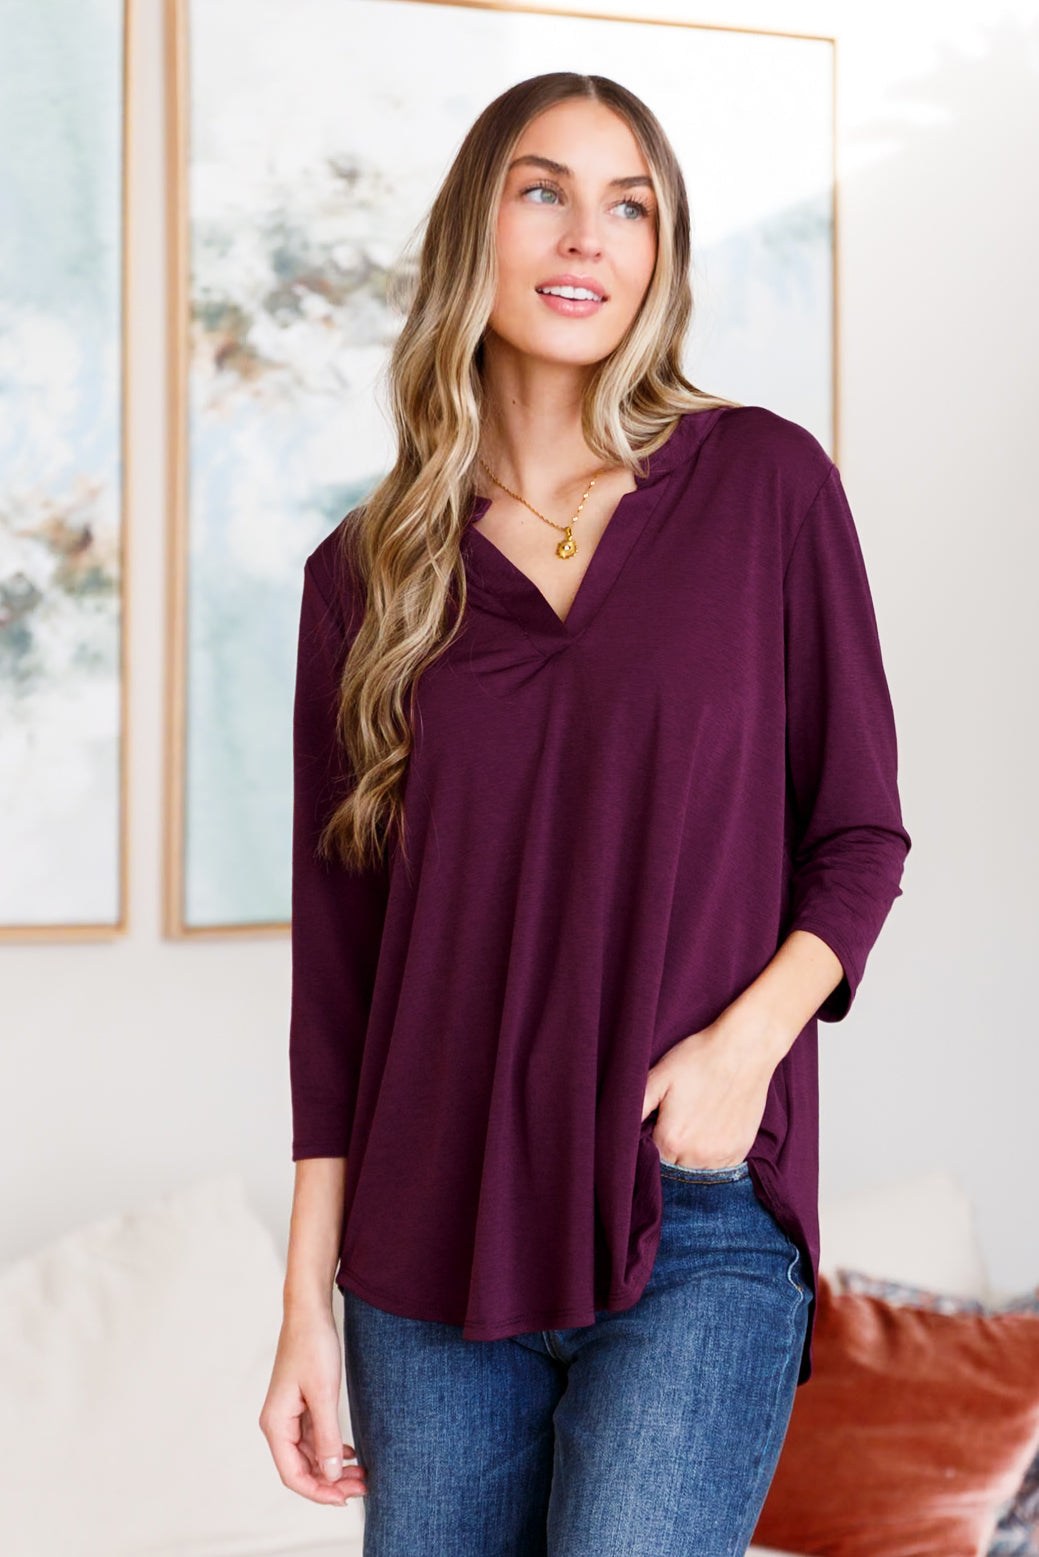 So Outstanding Top in Dark Magenta-Long Sleeve Tops-Inspired by Justeen-Women's Clothing Boutique